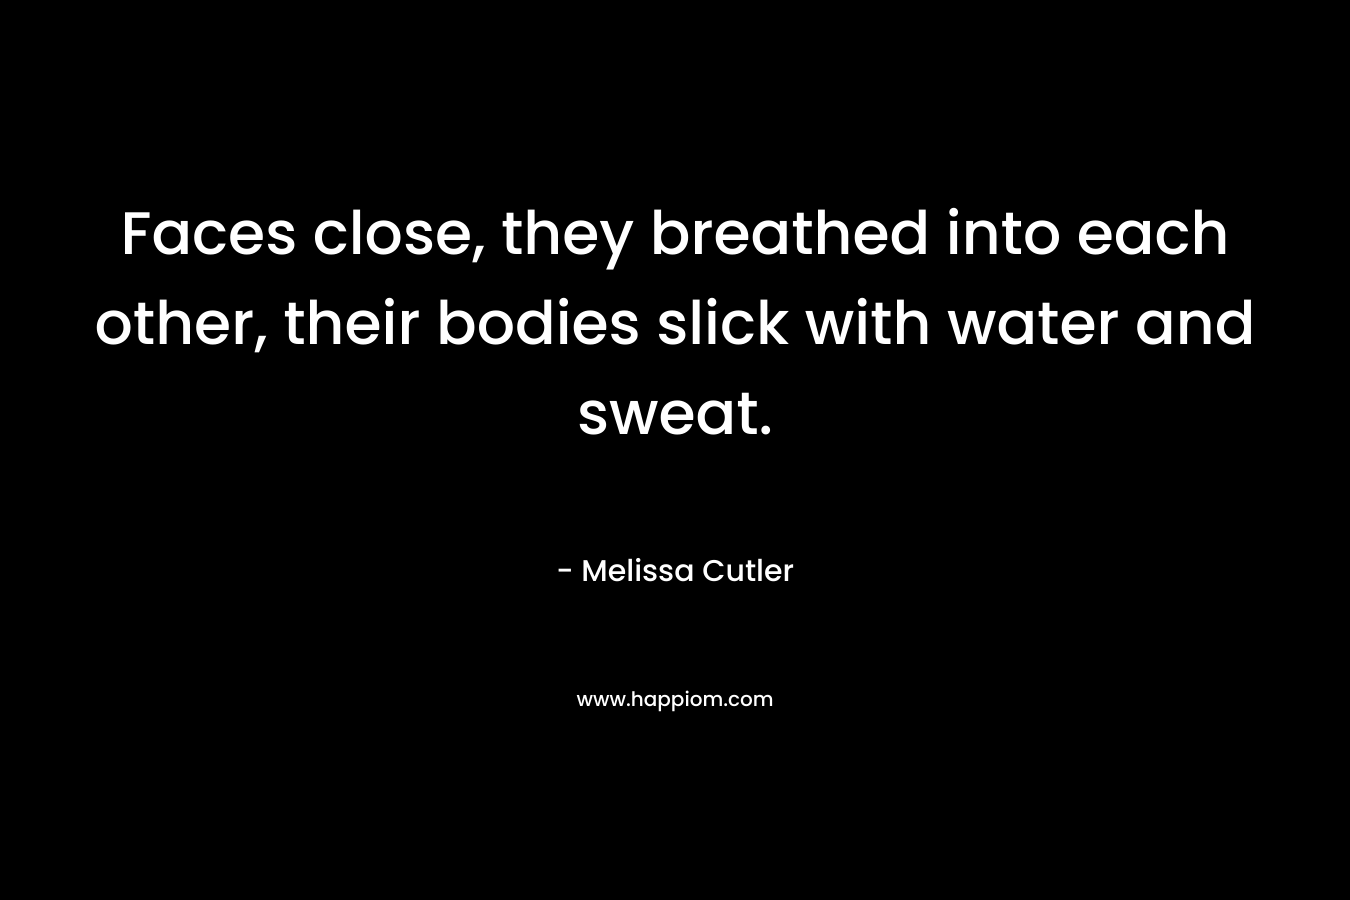 Faces close, they breathed into each other, their bodies slick with water and sweat. – Melissa Cutler